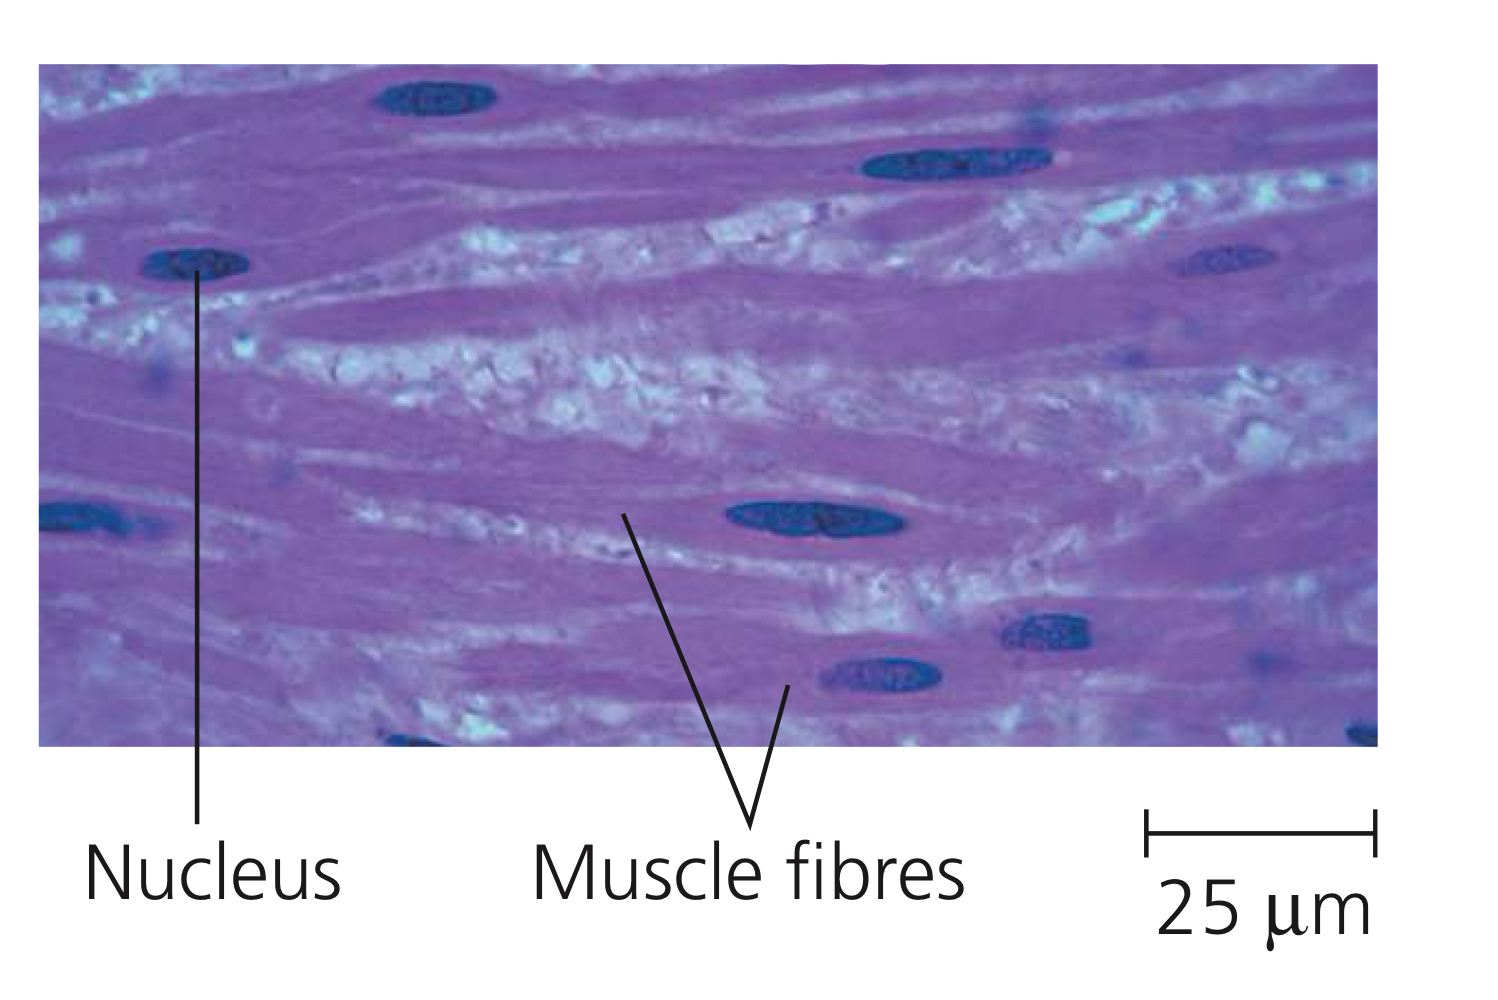 <p>Muscle specialized for involuntary body movements in vertebrates, such as tightening of arteries, and voluntary movements in invertebrates. Composed of muscle fibres but looking less compressed and lacking striations, giving the fibres a spindle-like shape. </p>